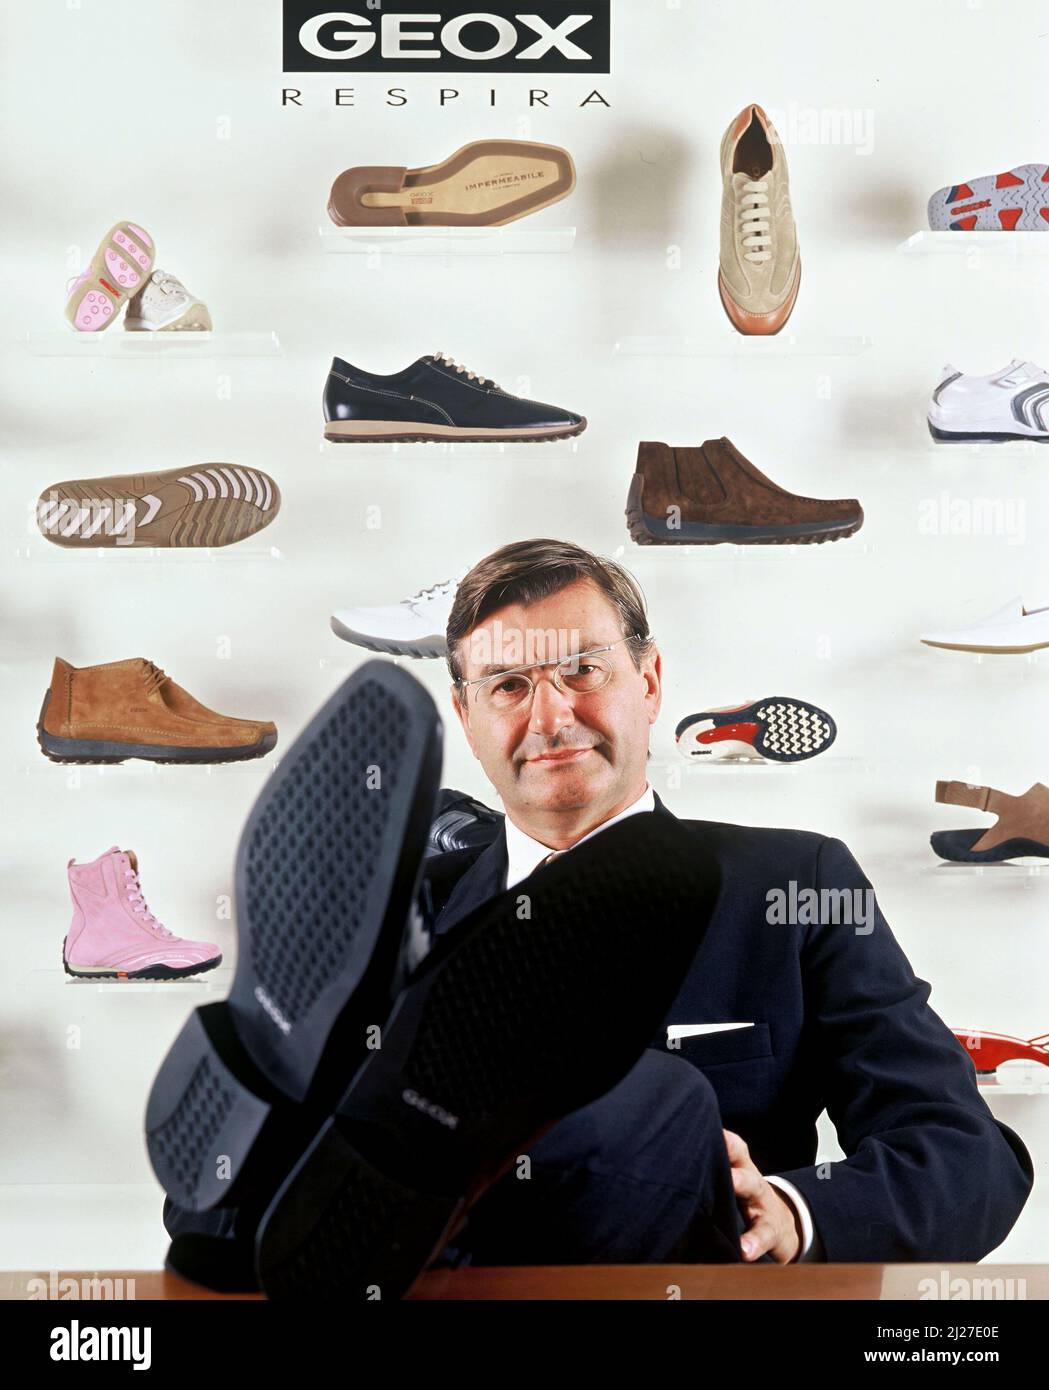 Italy, Montebelluna Mario Polegato, founder of Geox SpA Company. Geox a world leader in the shoes industry. Photo © Sandro Mi Stock Photo - Alamy